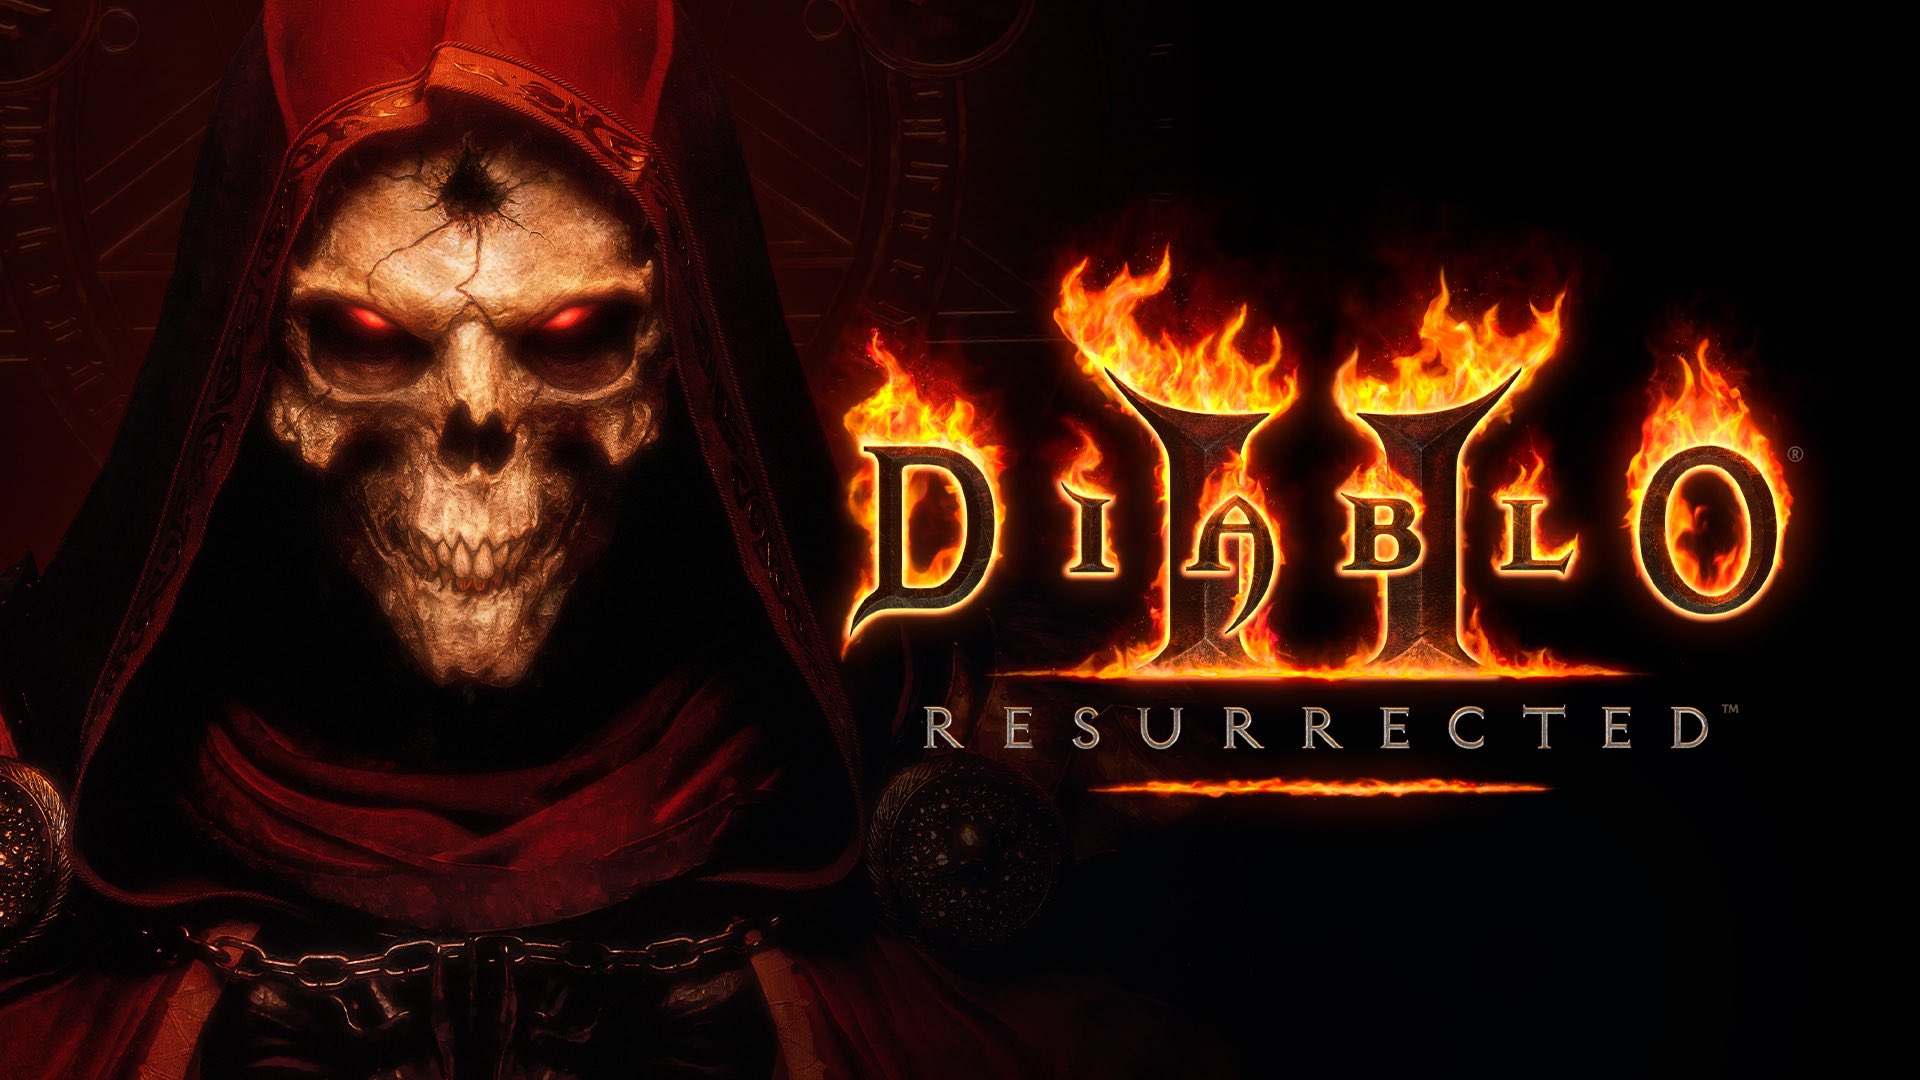 Diablo 2 Resurrected Requires Players To Log In Every 30 Days